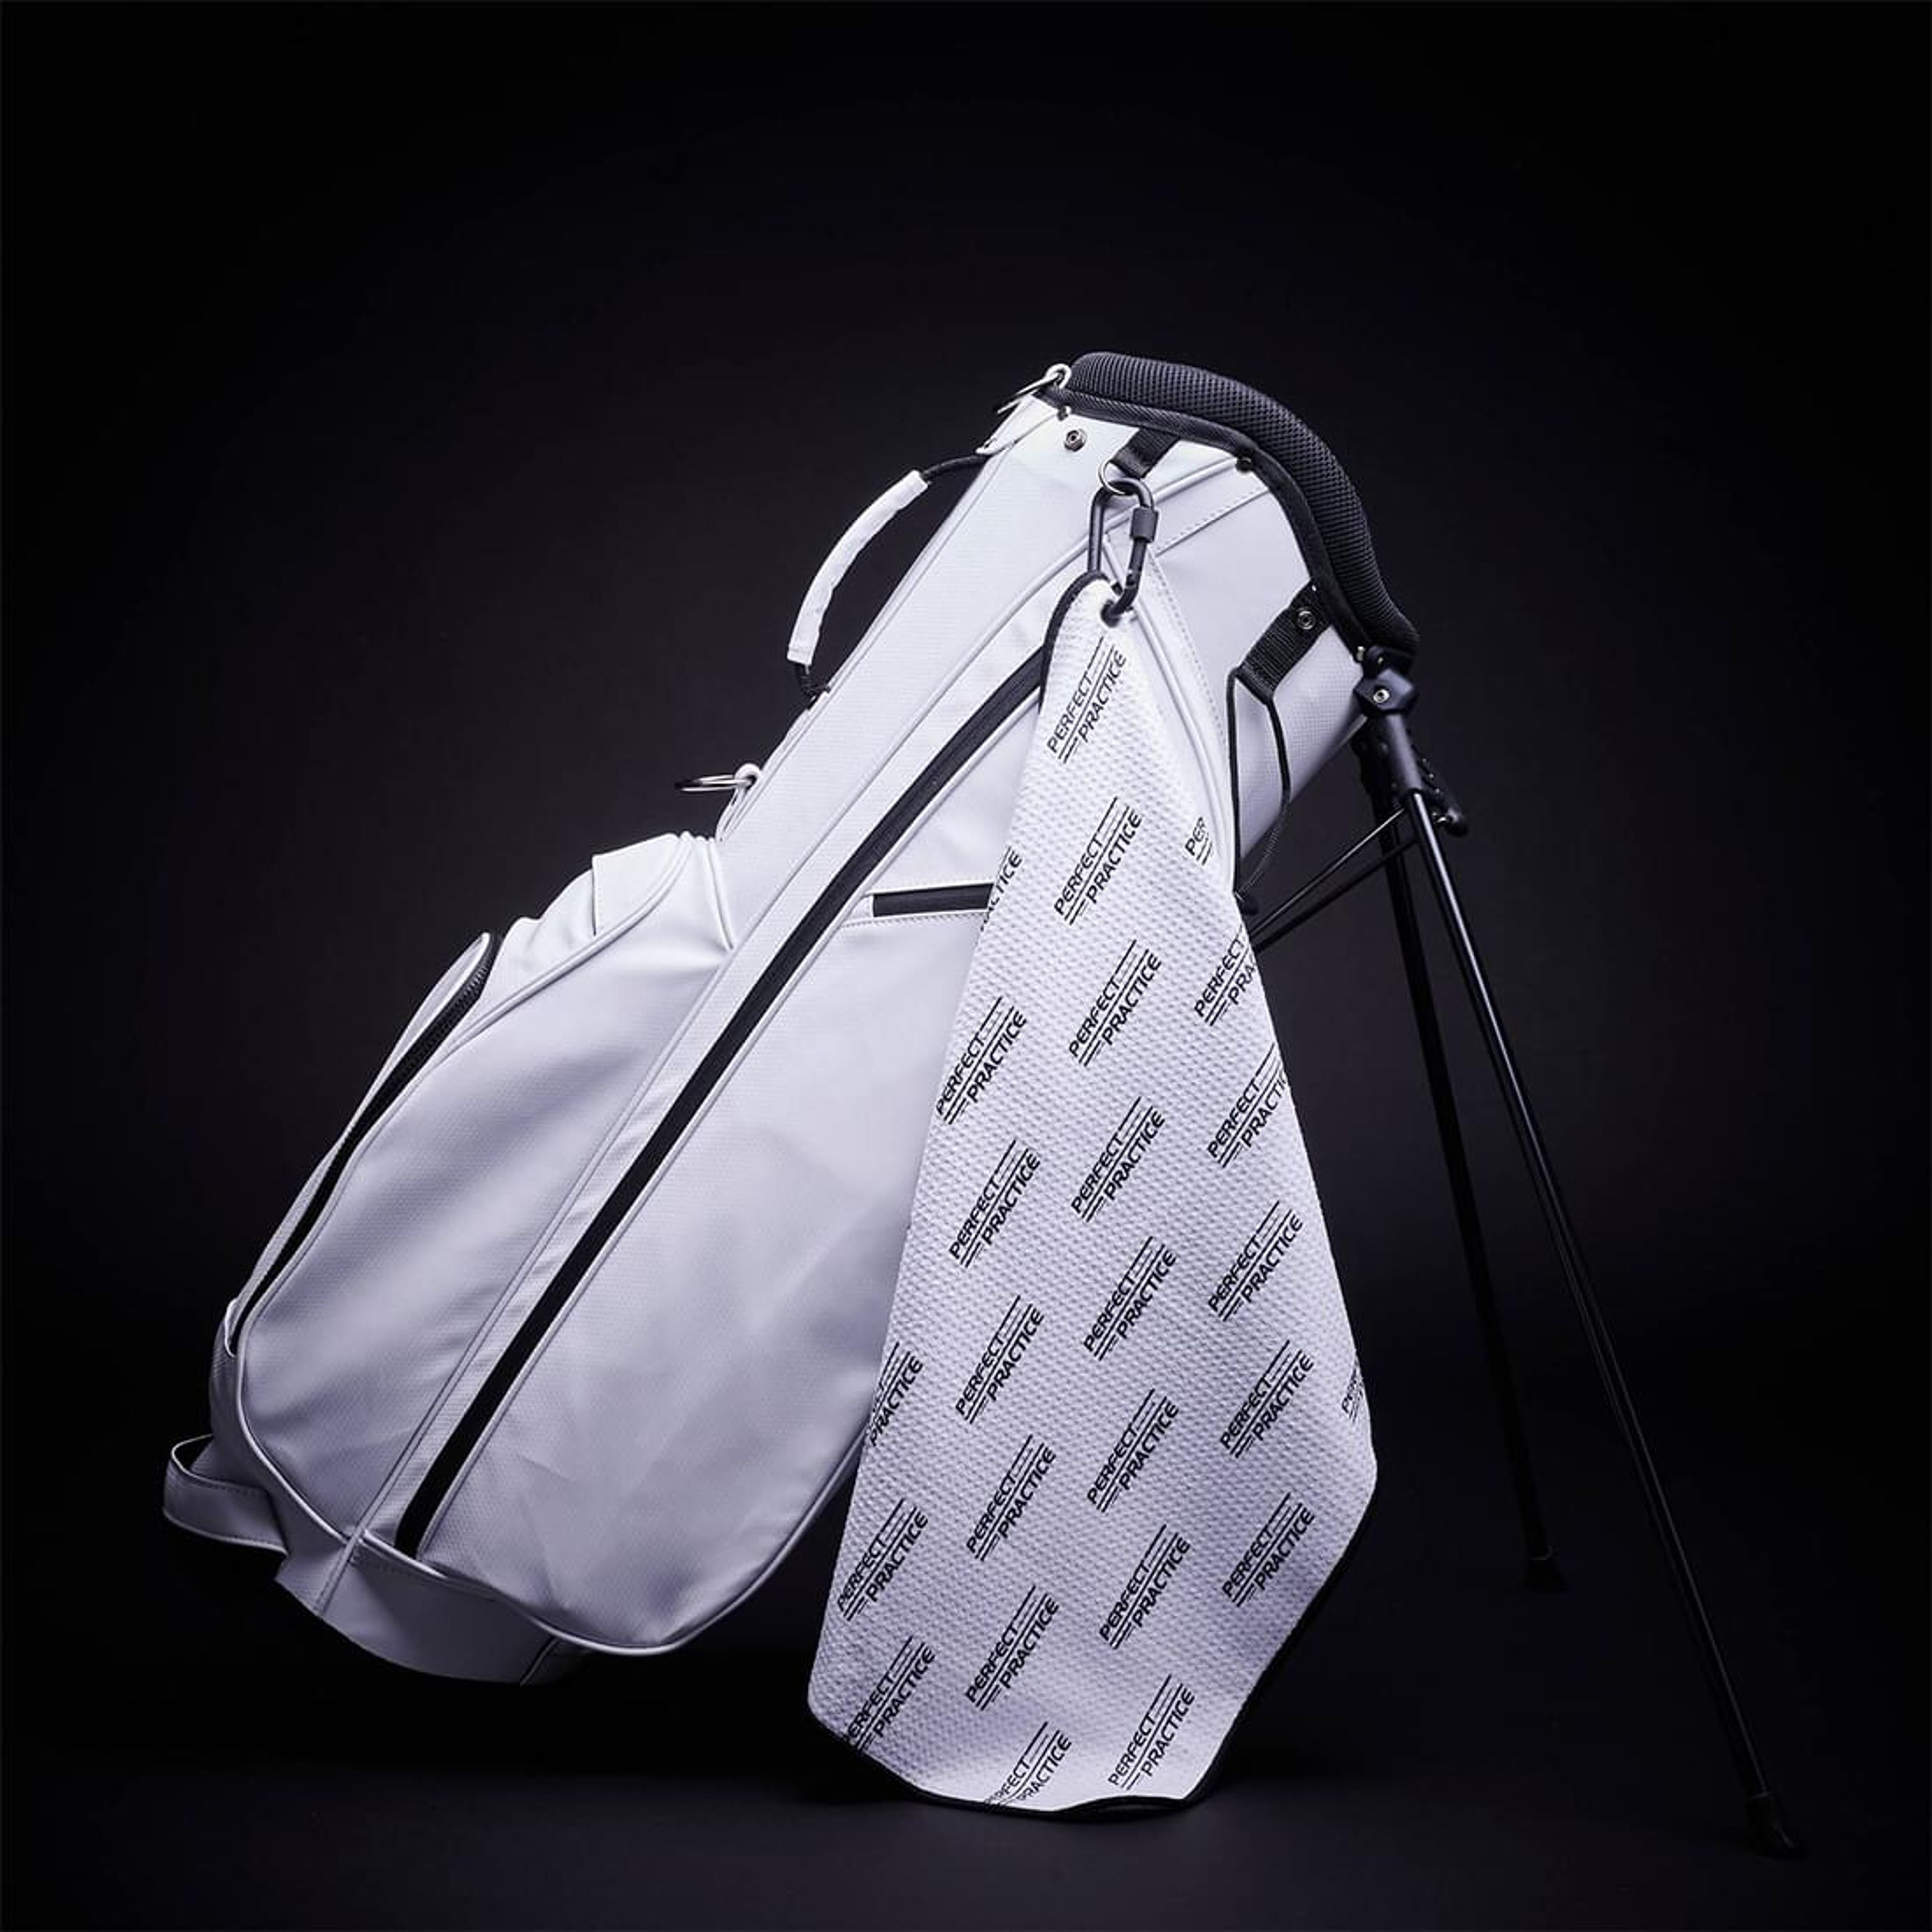 Ladies 2-Star BERES Aizu Clubs with Bag for $5,600 – Honma Golf